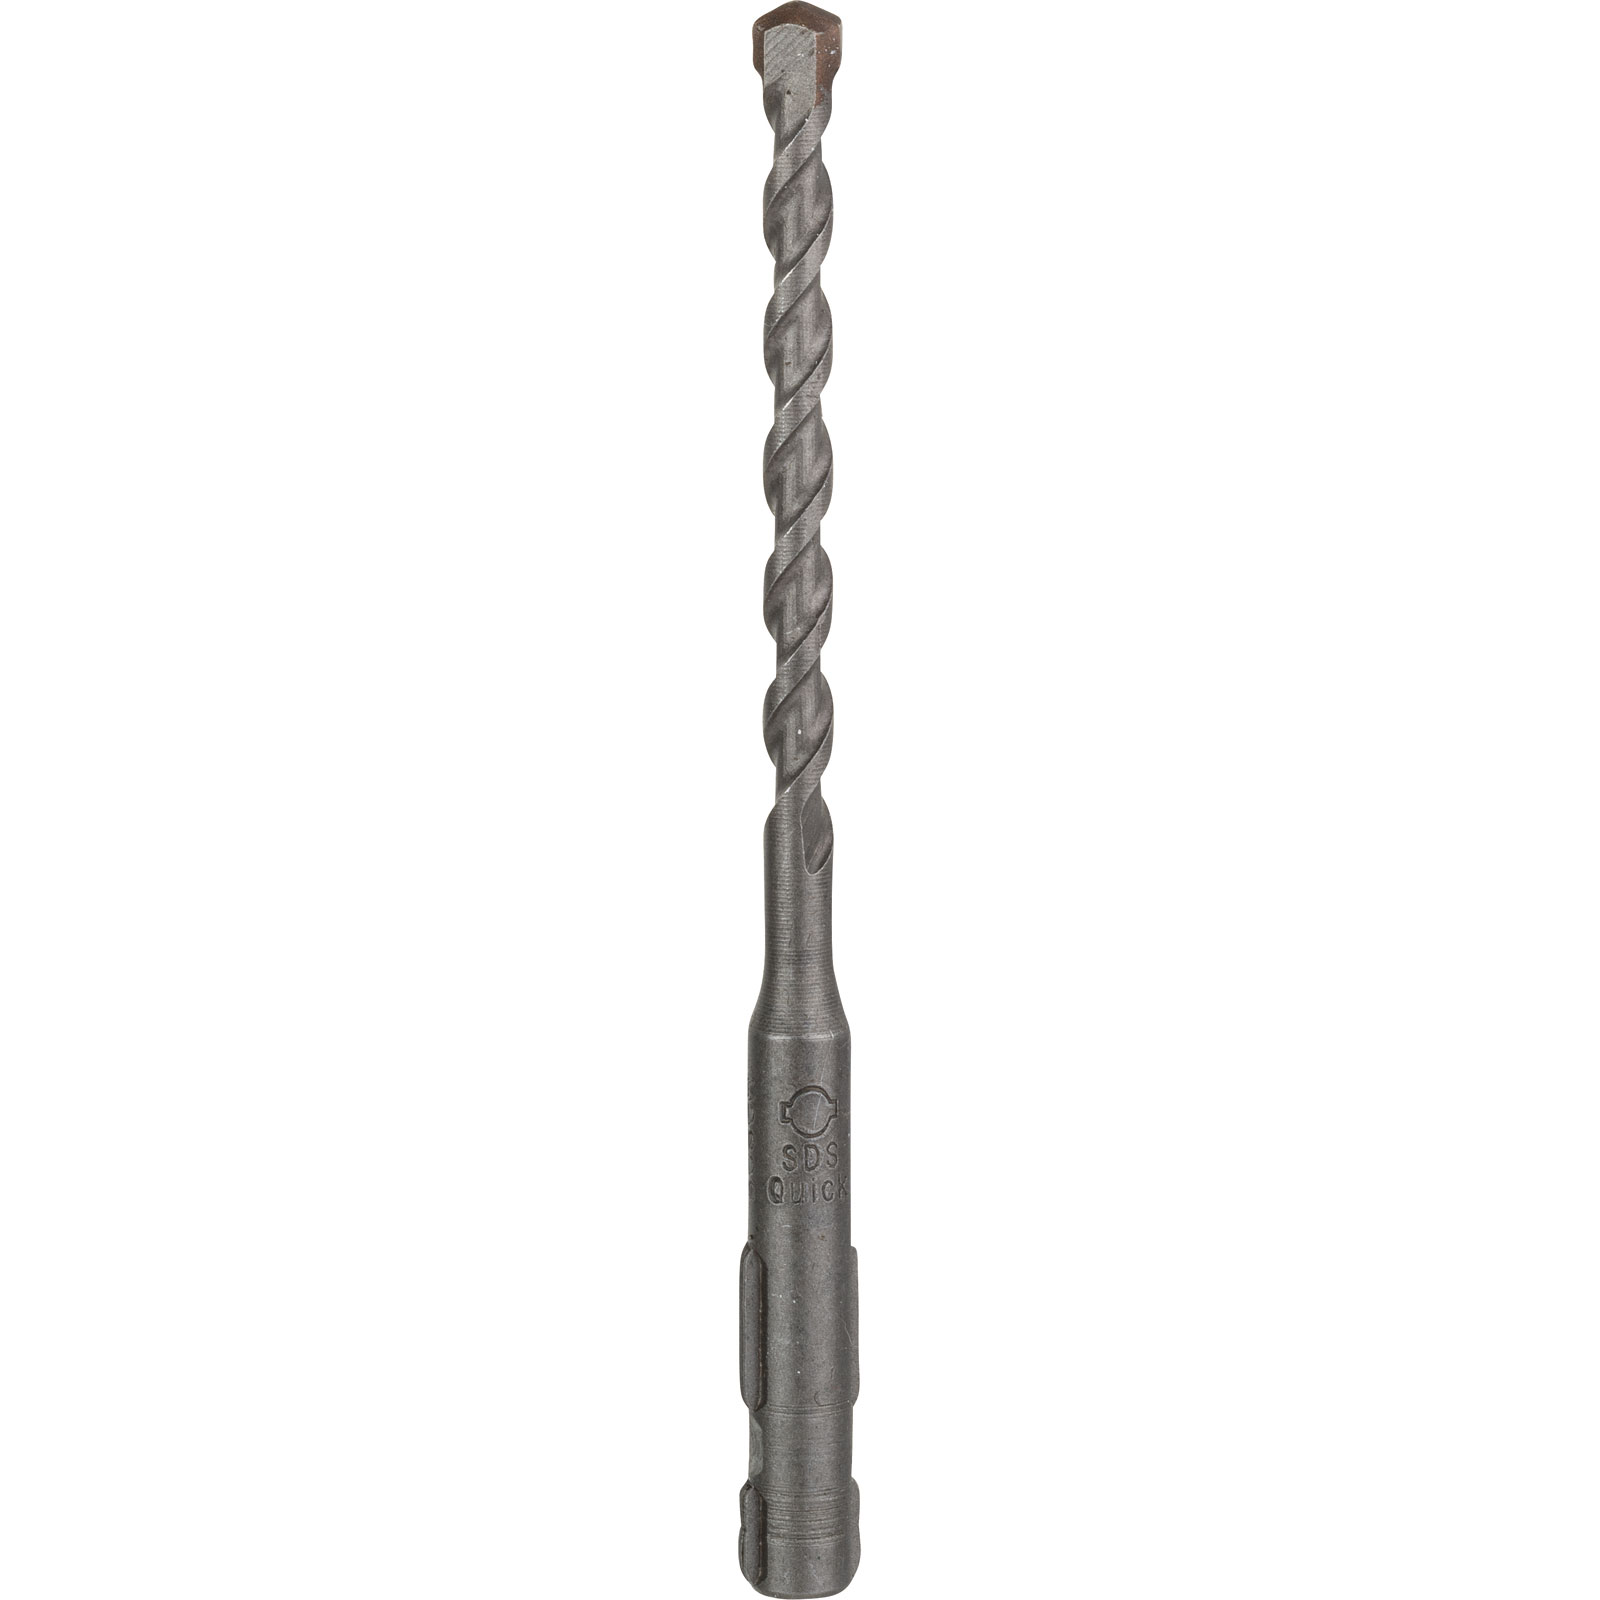 Image of Bosch UNEO SDS Quick Masonary Drill Bit 5.5mm 100mm Pack of 1